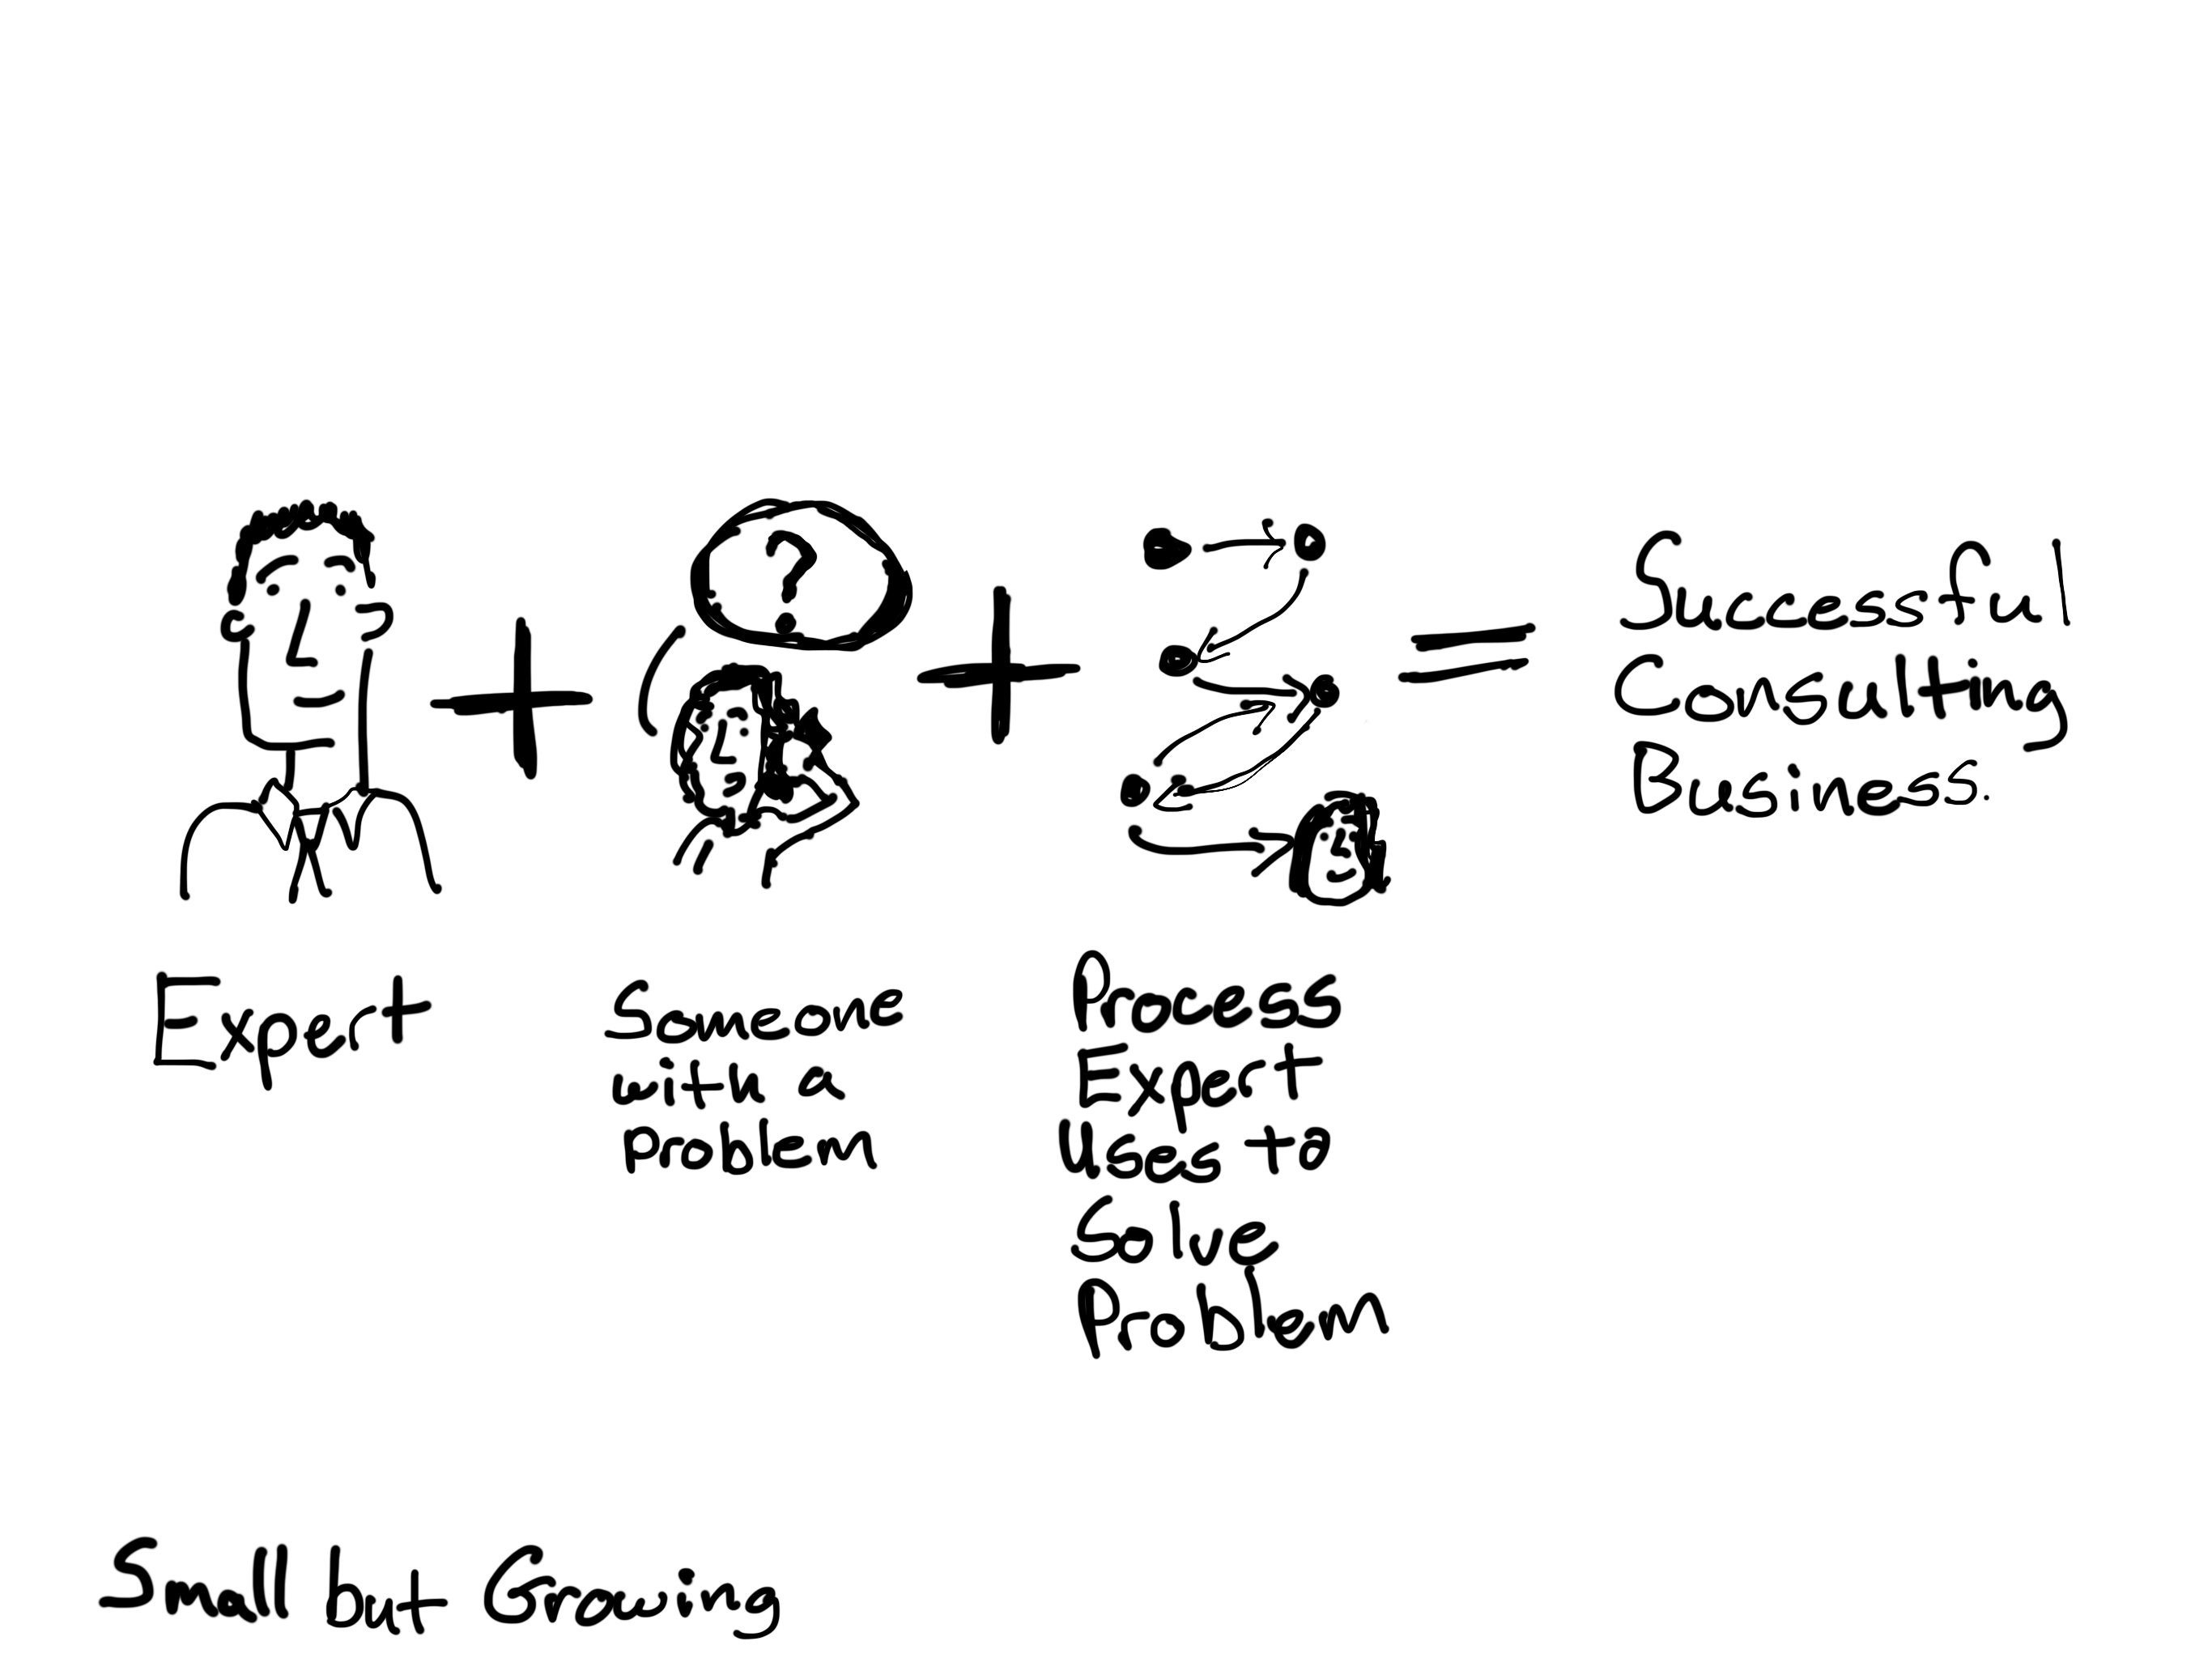 Successful consulting business cartoon by Chris lysy